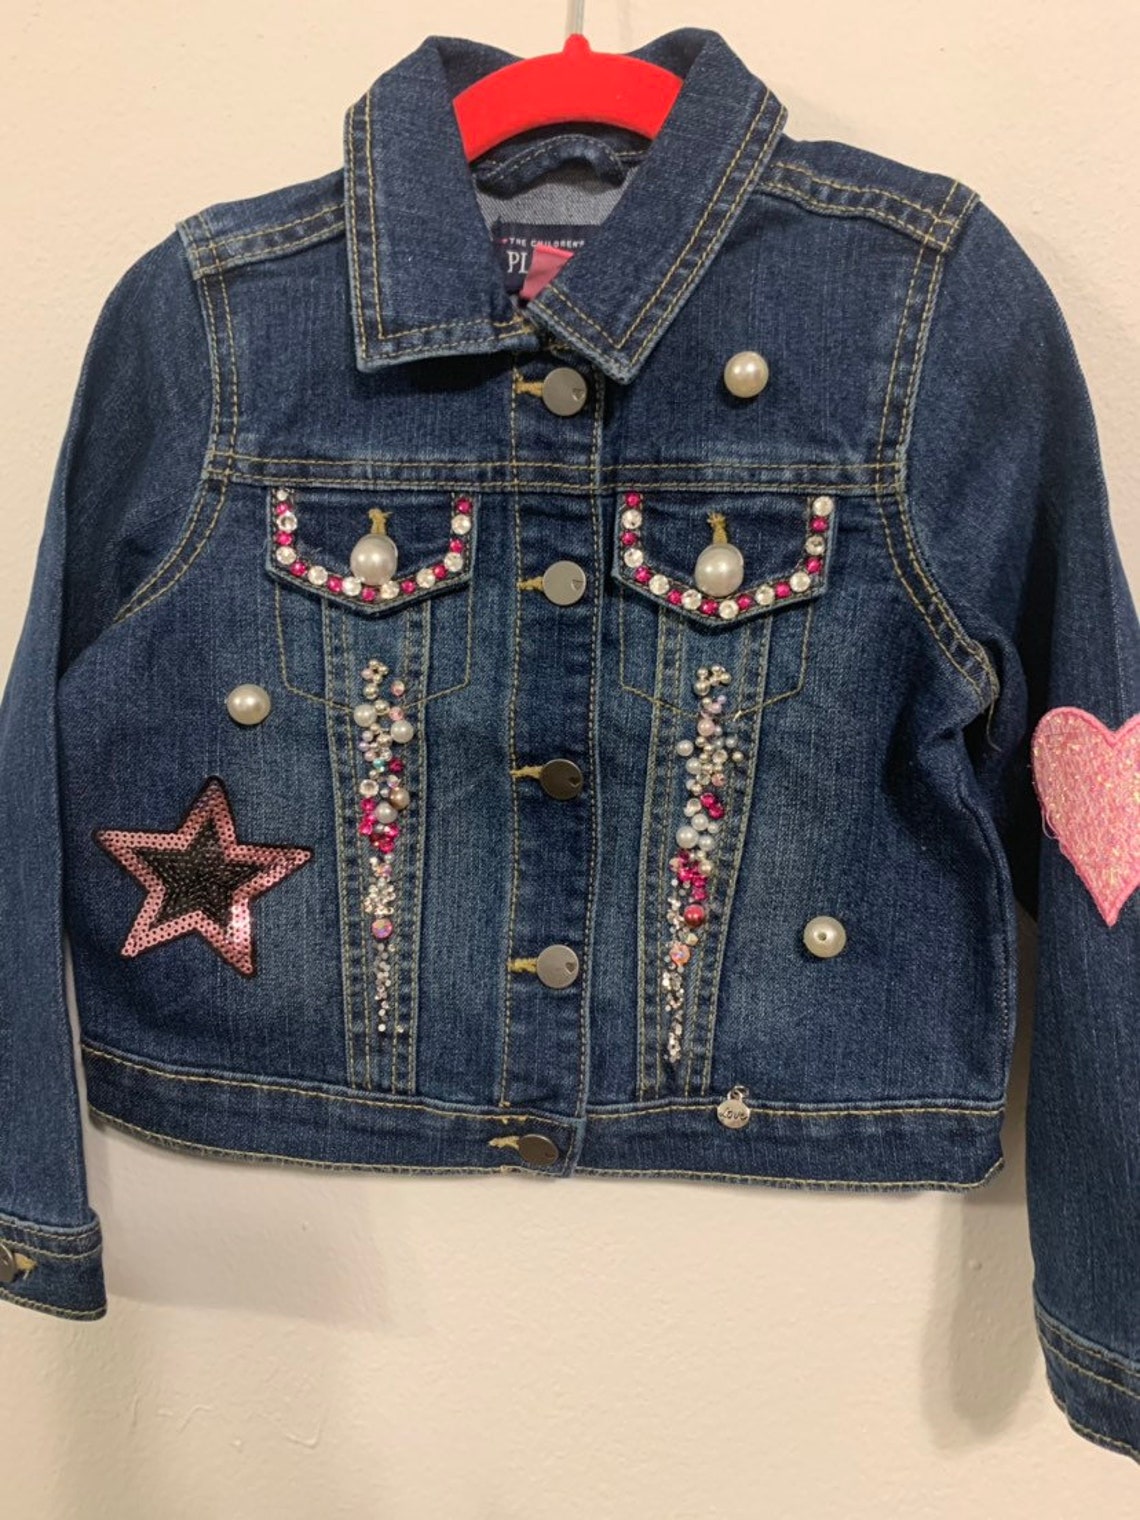 Baby Jean Jackets Custom And Handmade With Much Love Etsy